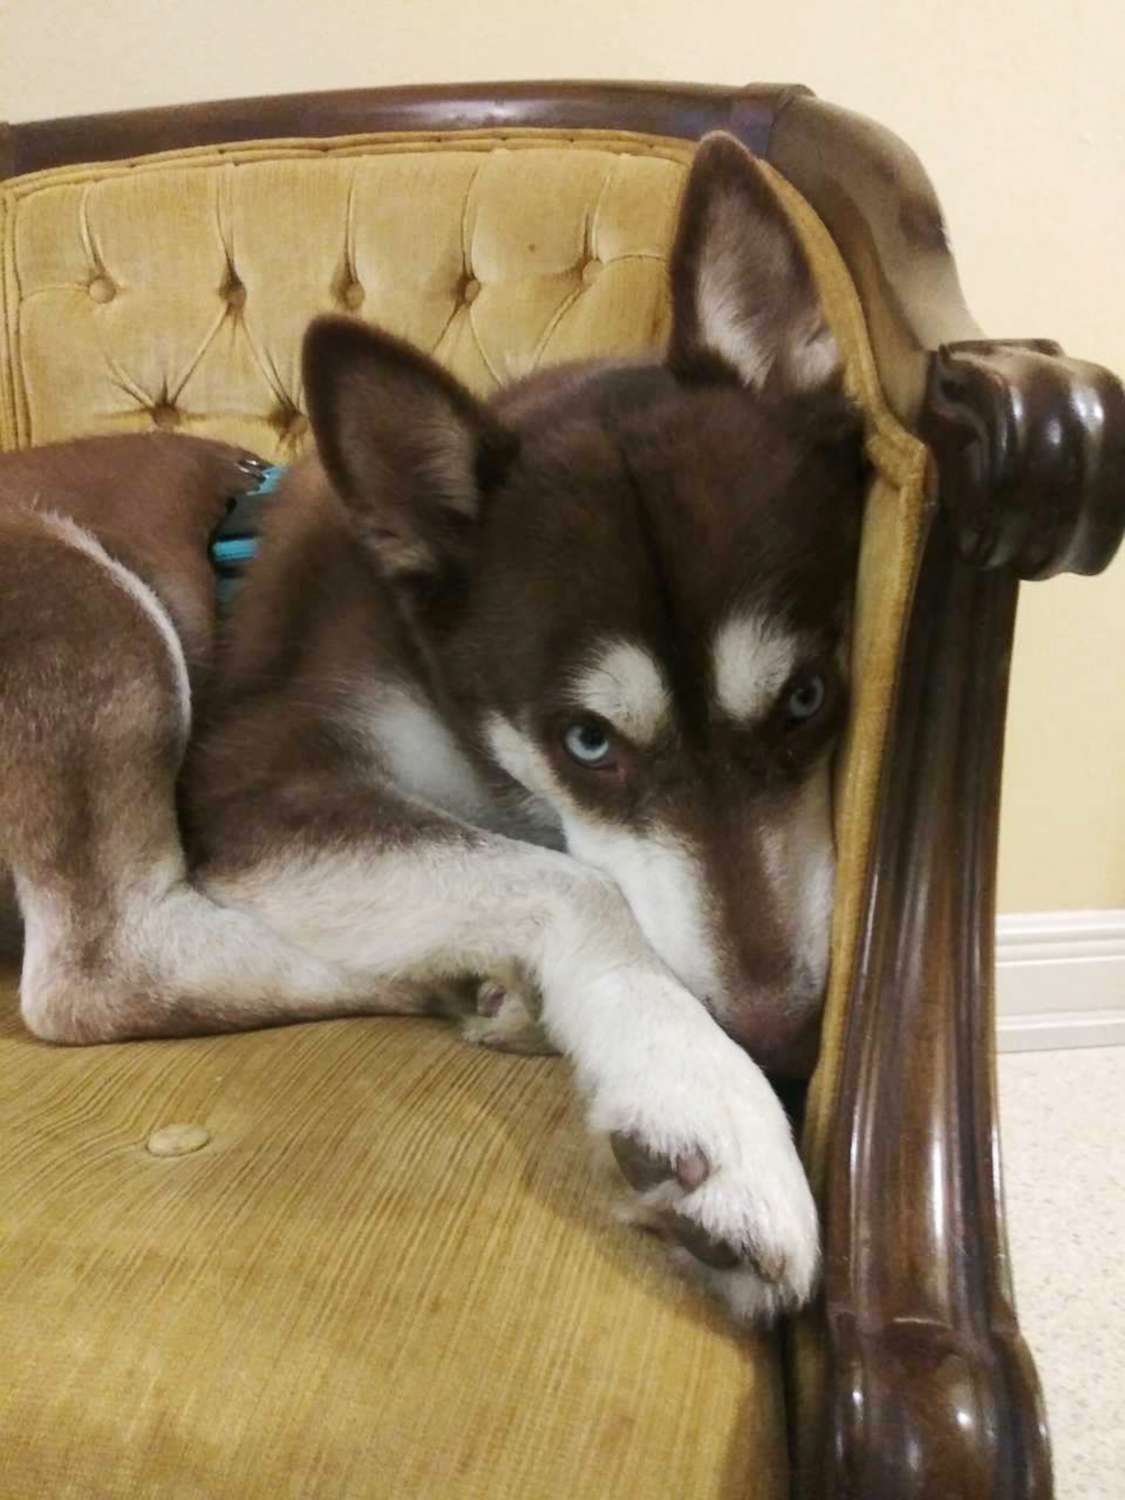 PHOTO: Sinatra the husky snuggles on a chair at the Verrill family home in a Tampa, Fla., suburb before he was returned to his owners on Nov. 26, 2018, almost two years after he ran away from his Brooklyn, New York home.